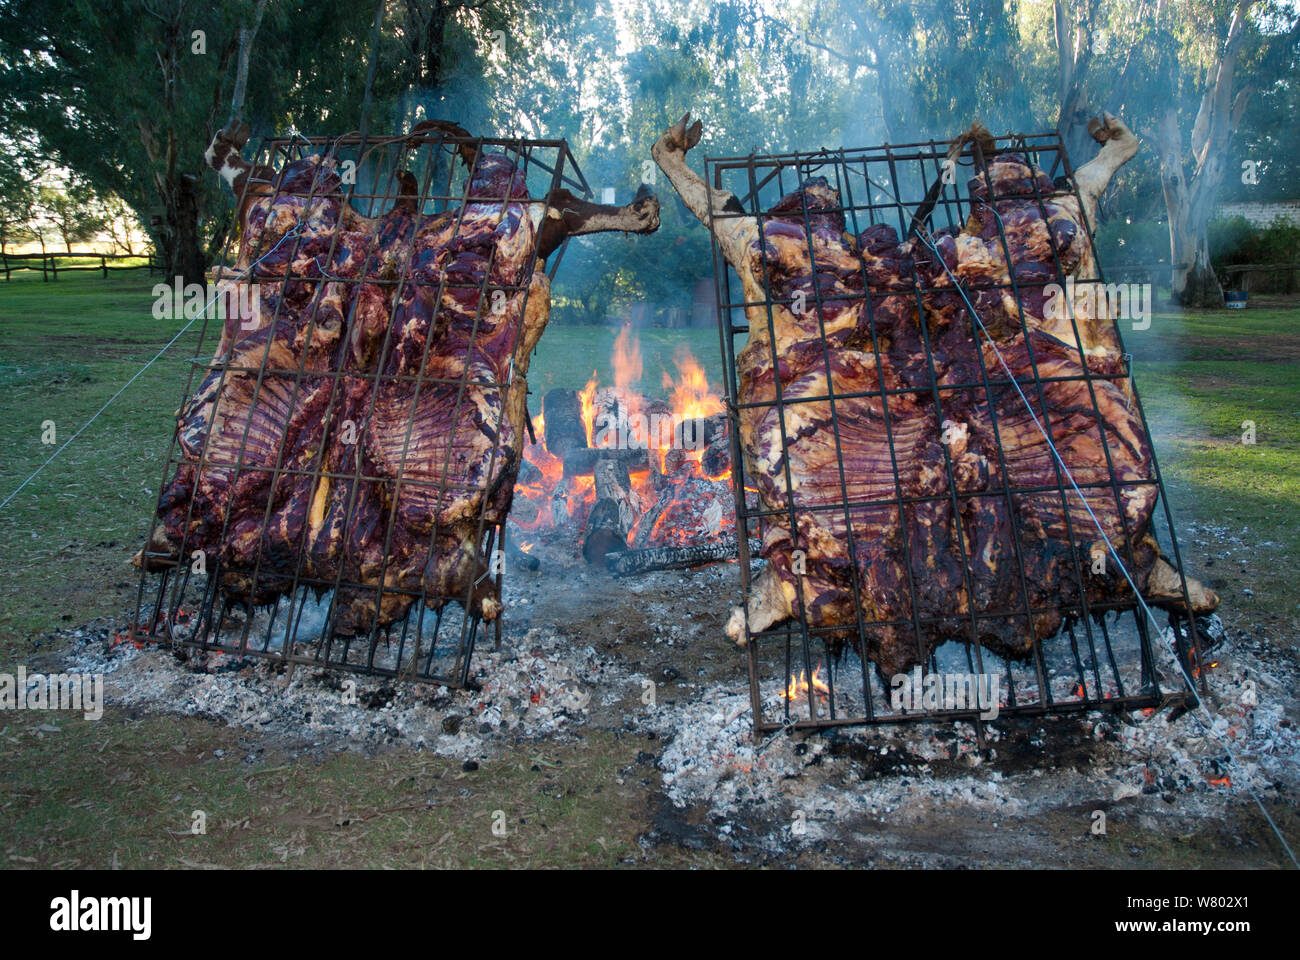 Roasted cow in cages, with leather, known as Asado Con Cuero, La Pampa, Argentina, March 2005. Stock Photo